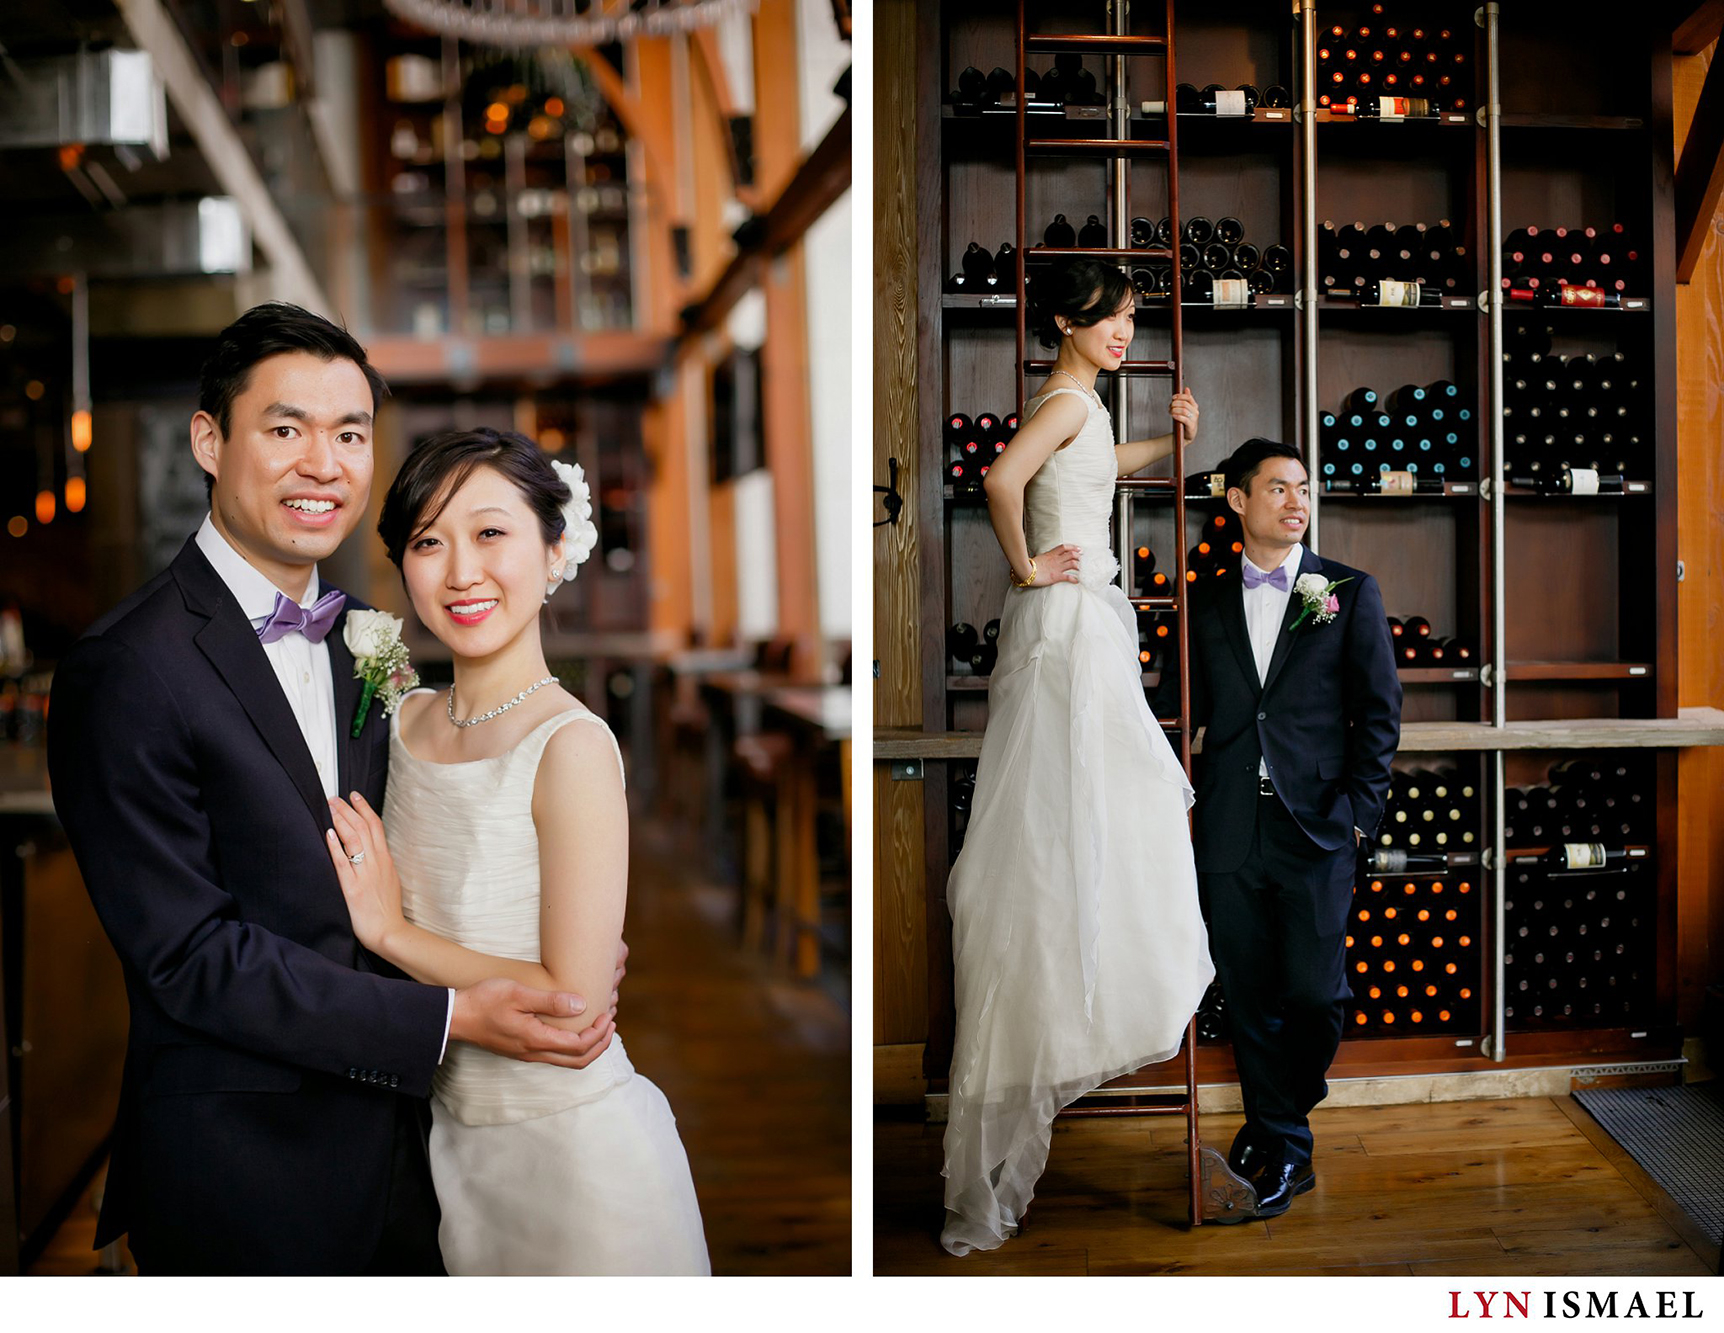 Portraits of the bride and groom at Reds Wine Tavern in Toronto, Ontario.